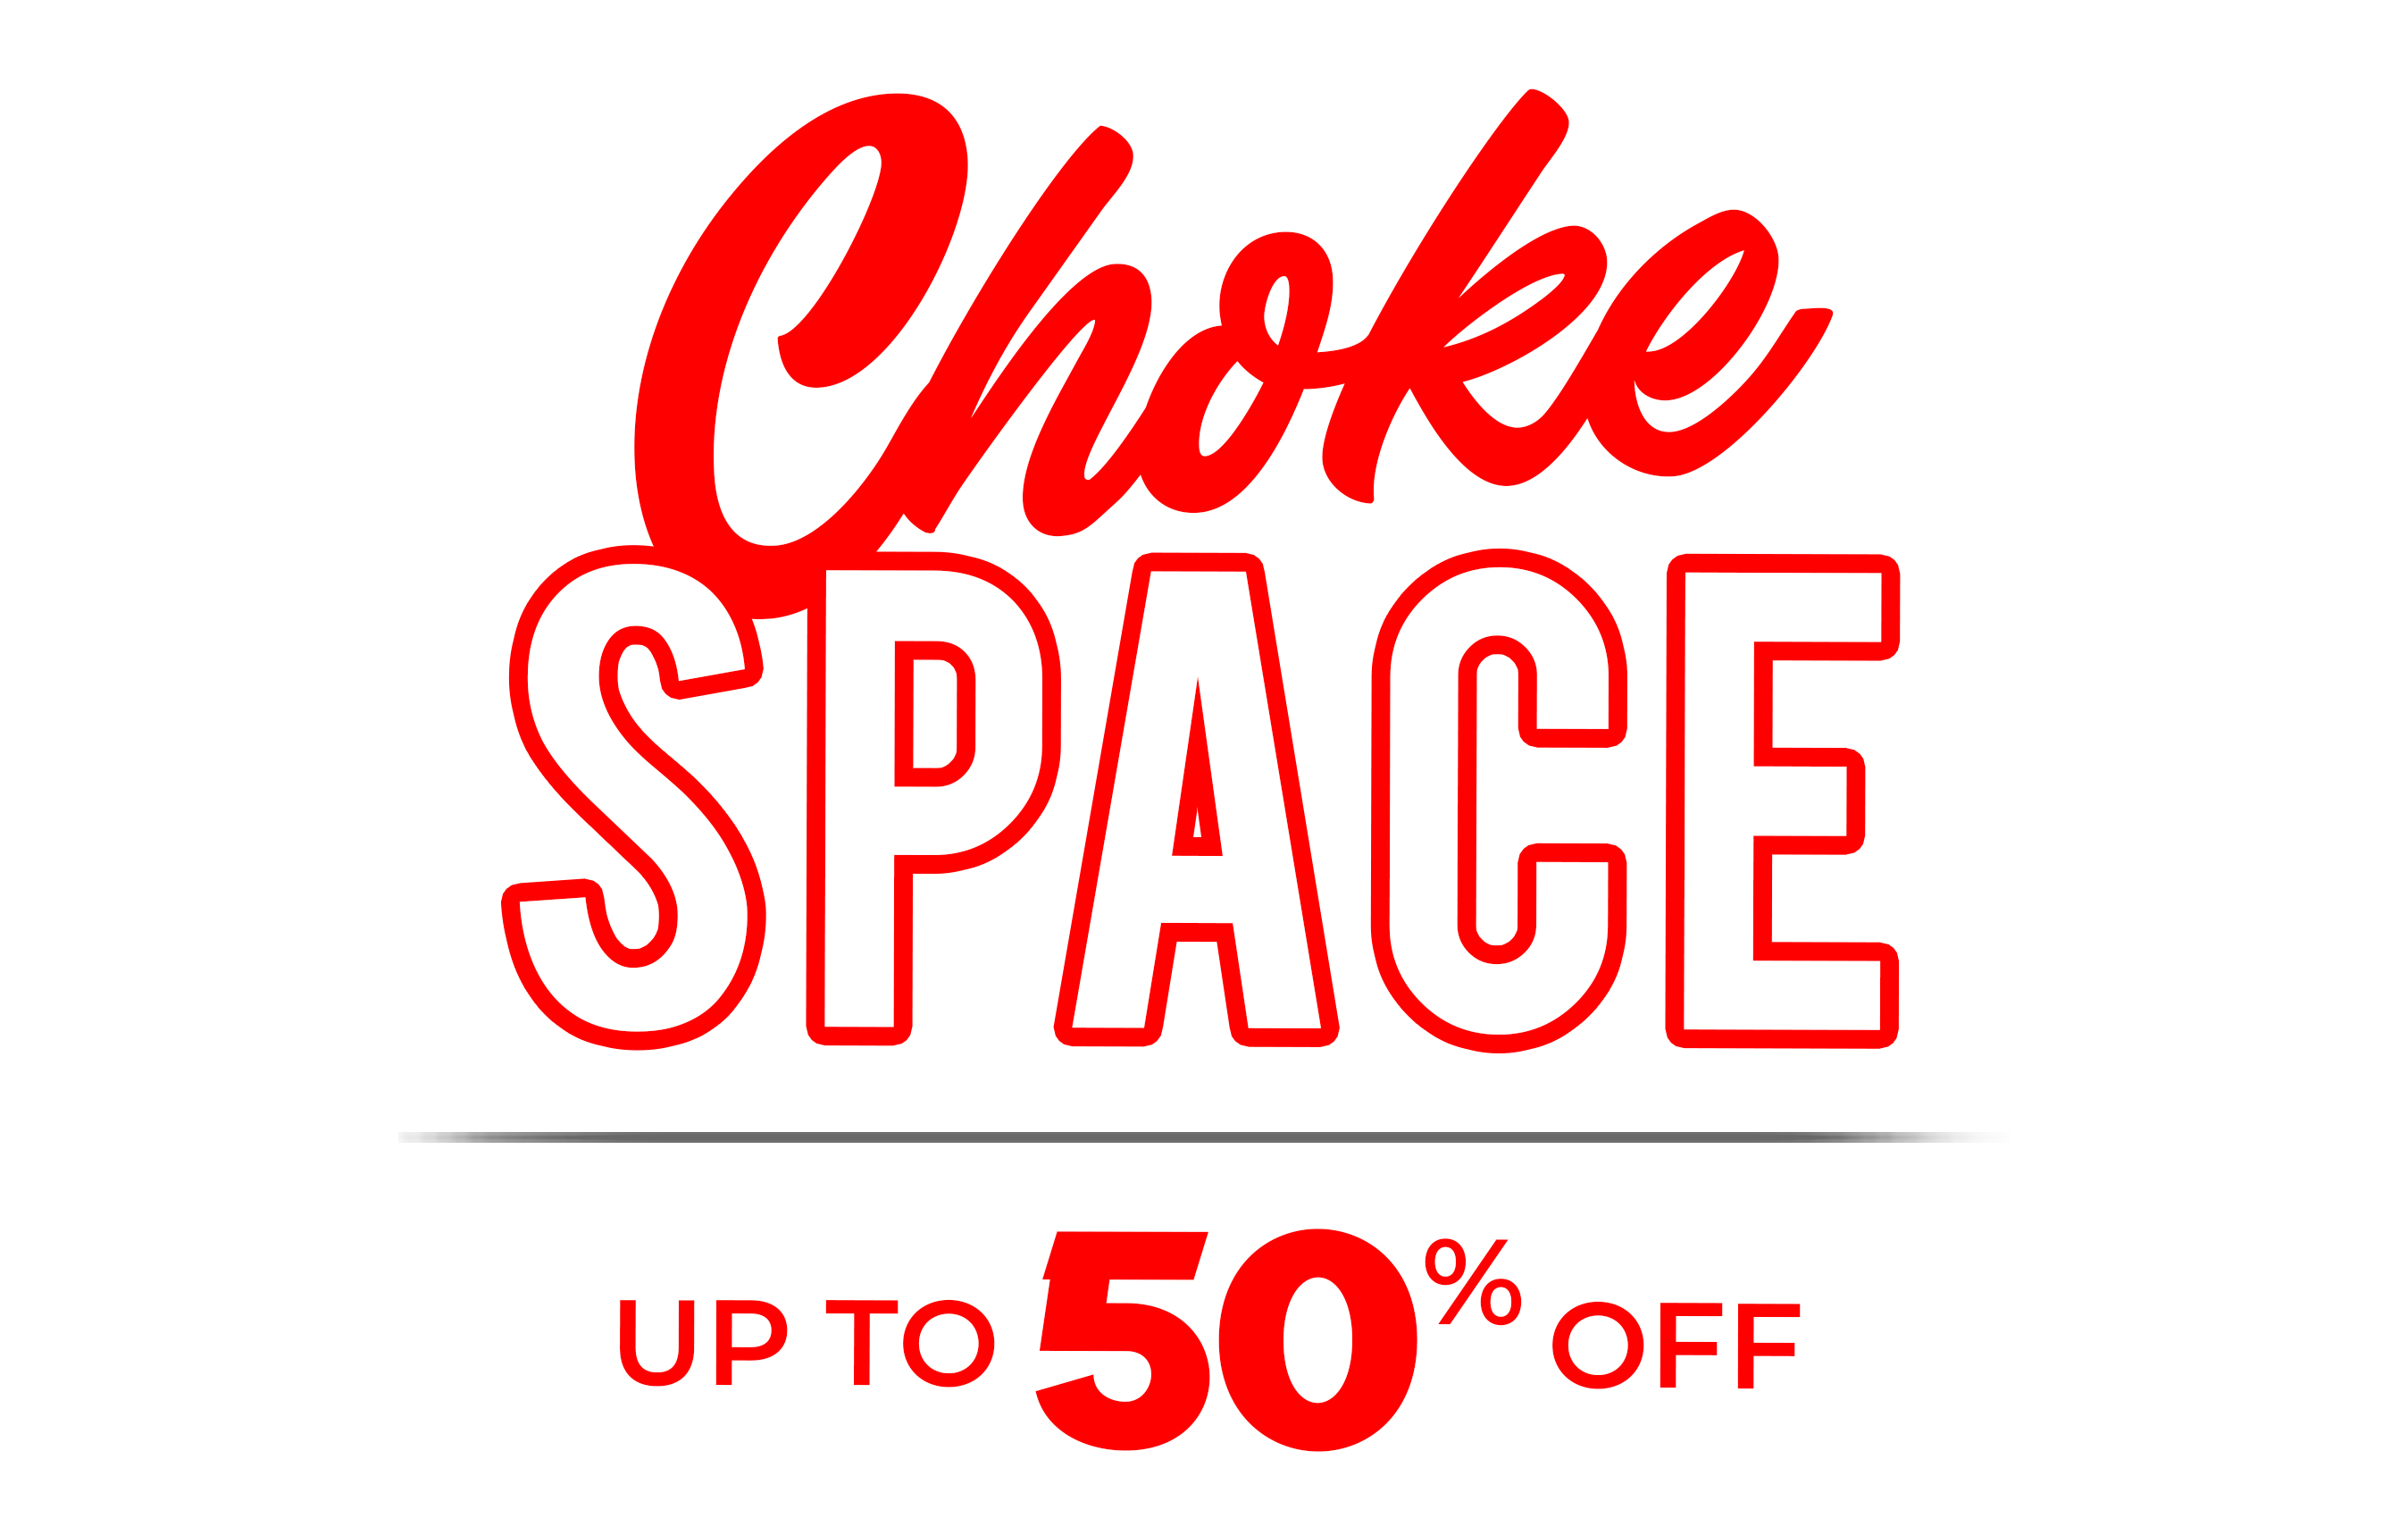 Choke Space Up To 50% Off